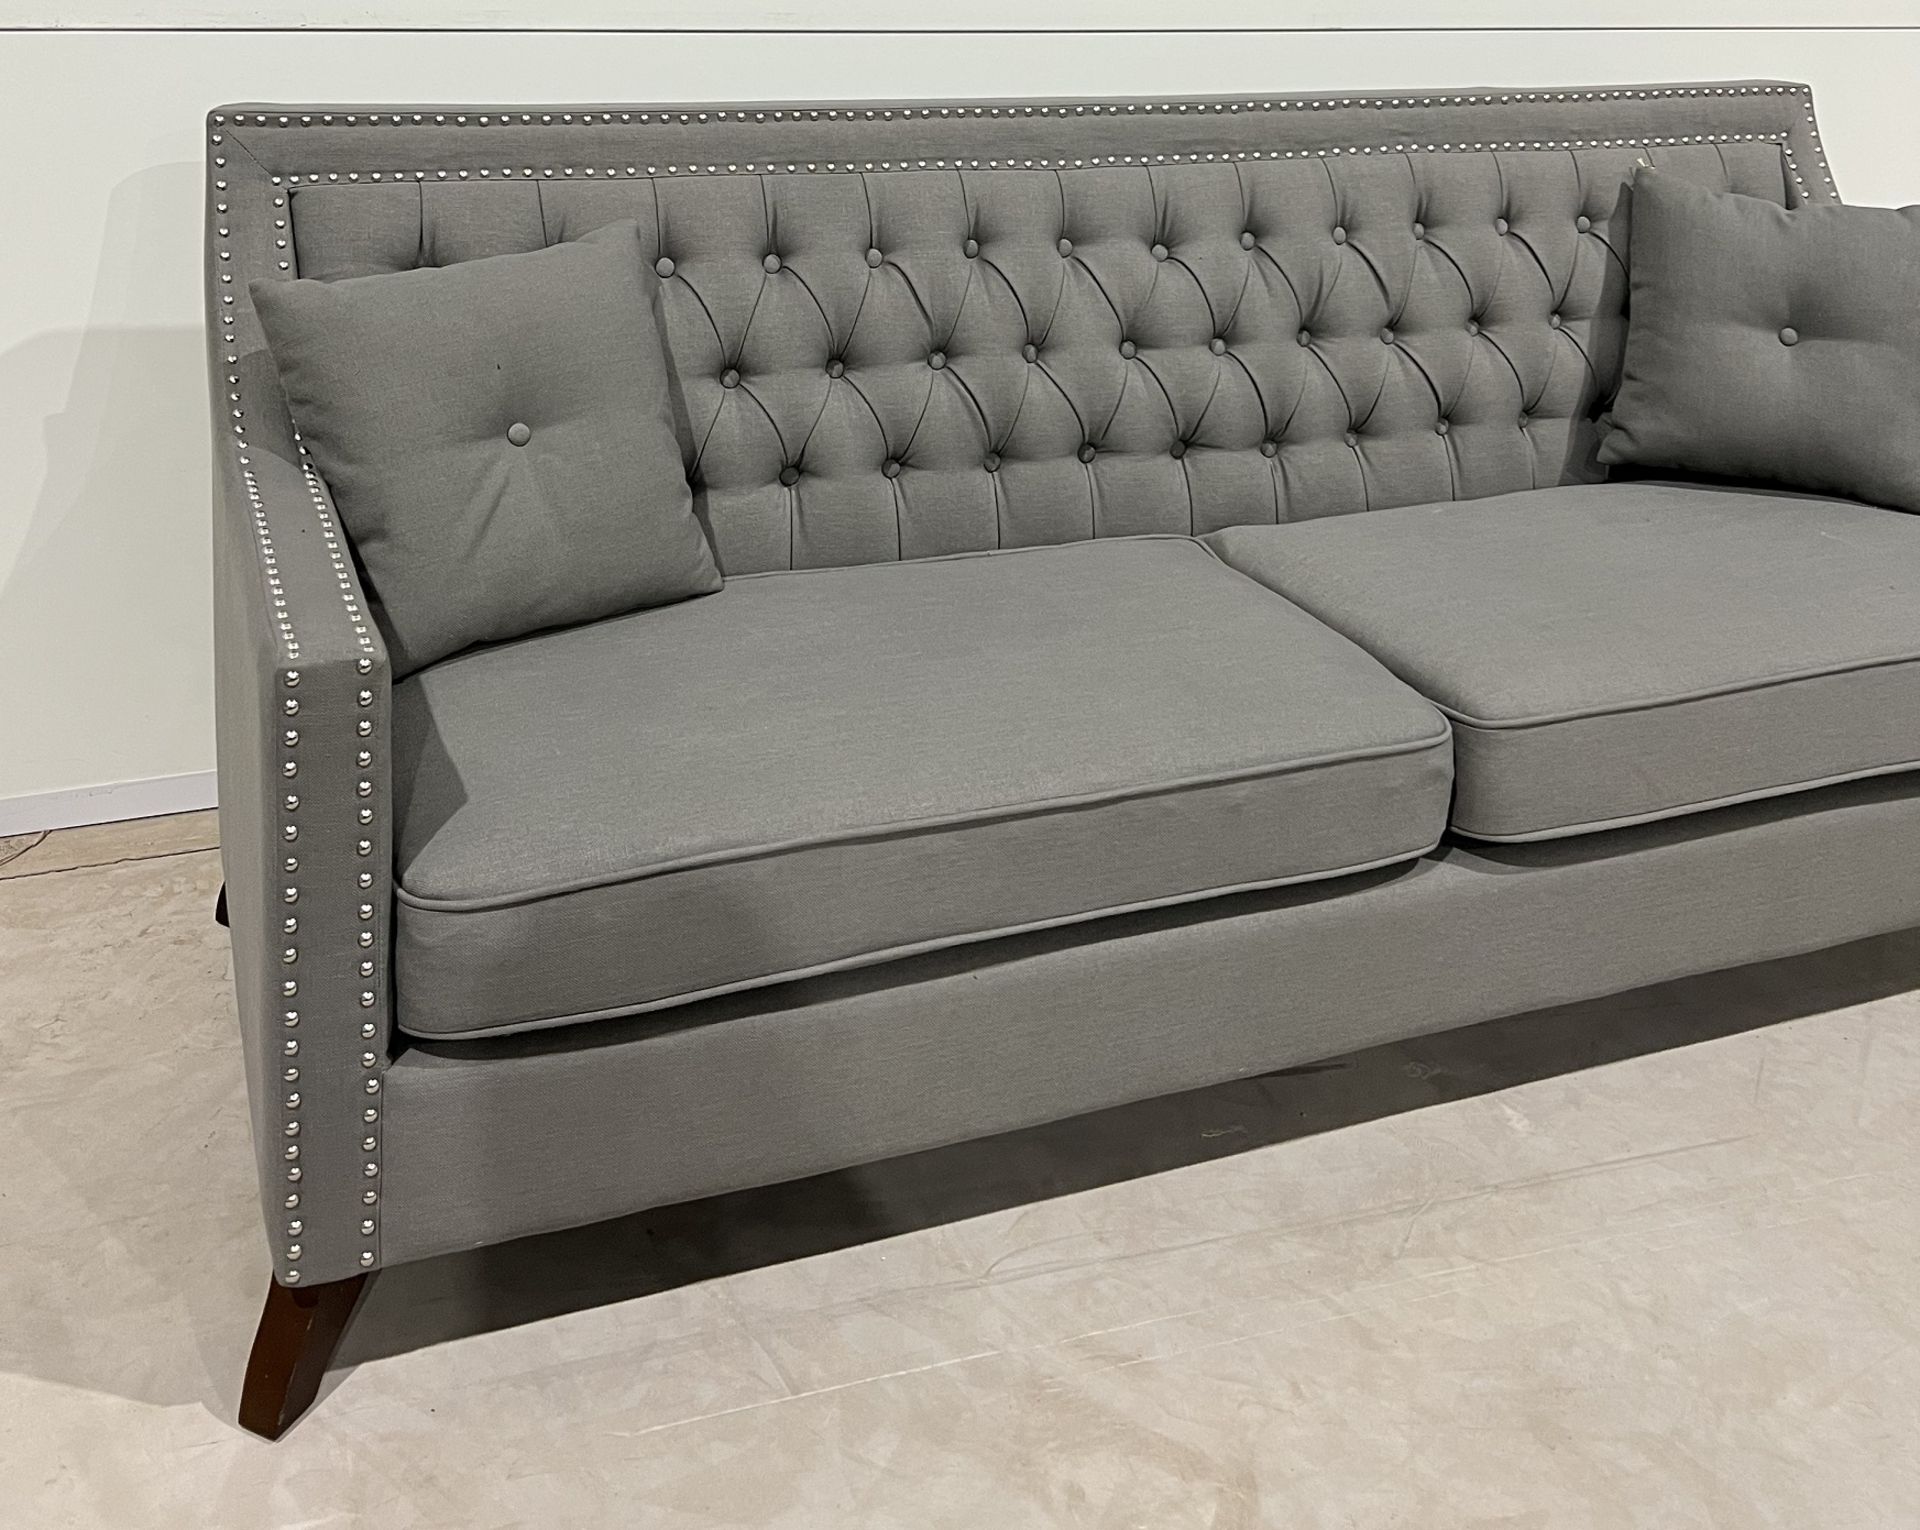 Chatsworth Grey Plush Fabric Sofa Offering A Decidedly Modern Take On The Classic Chesterfield - Bild 3 aus 3